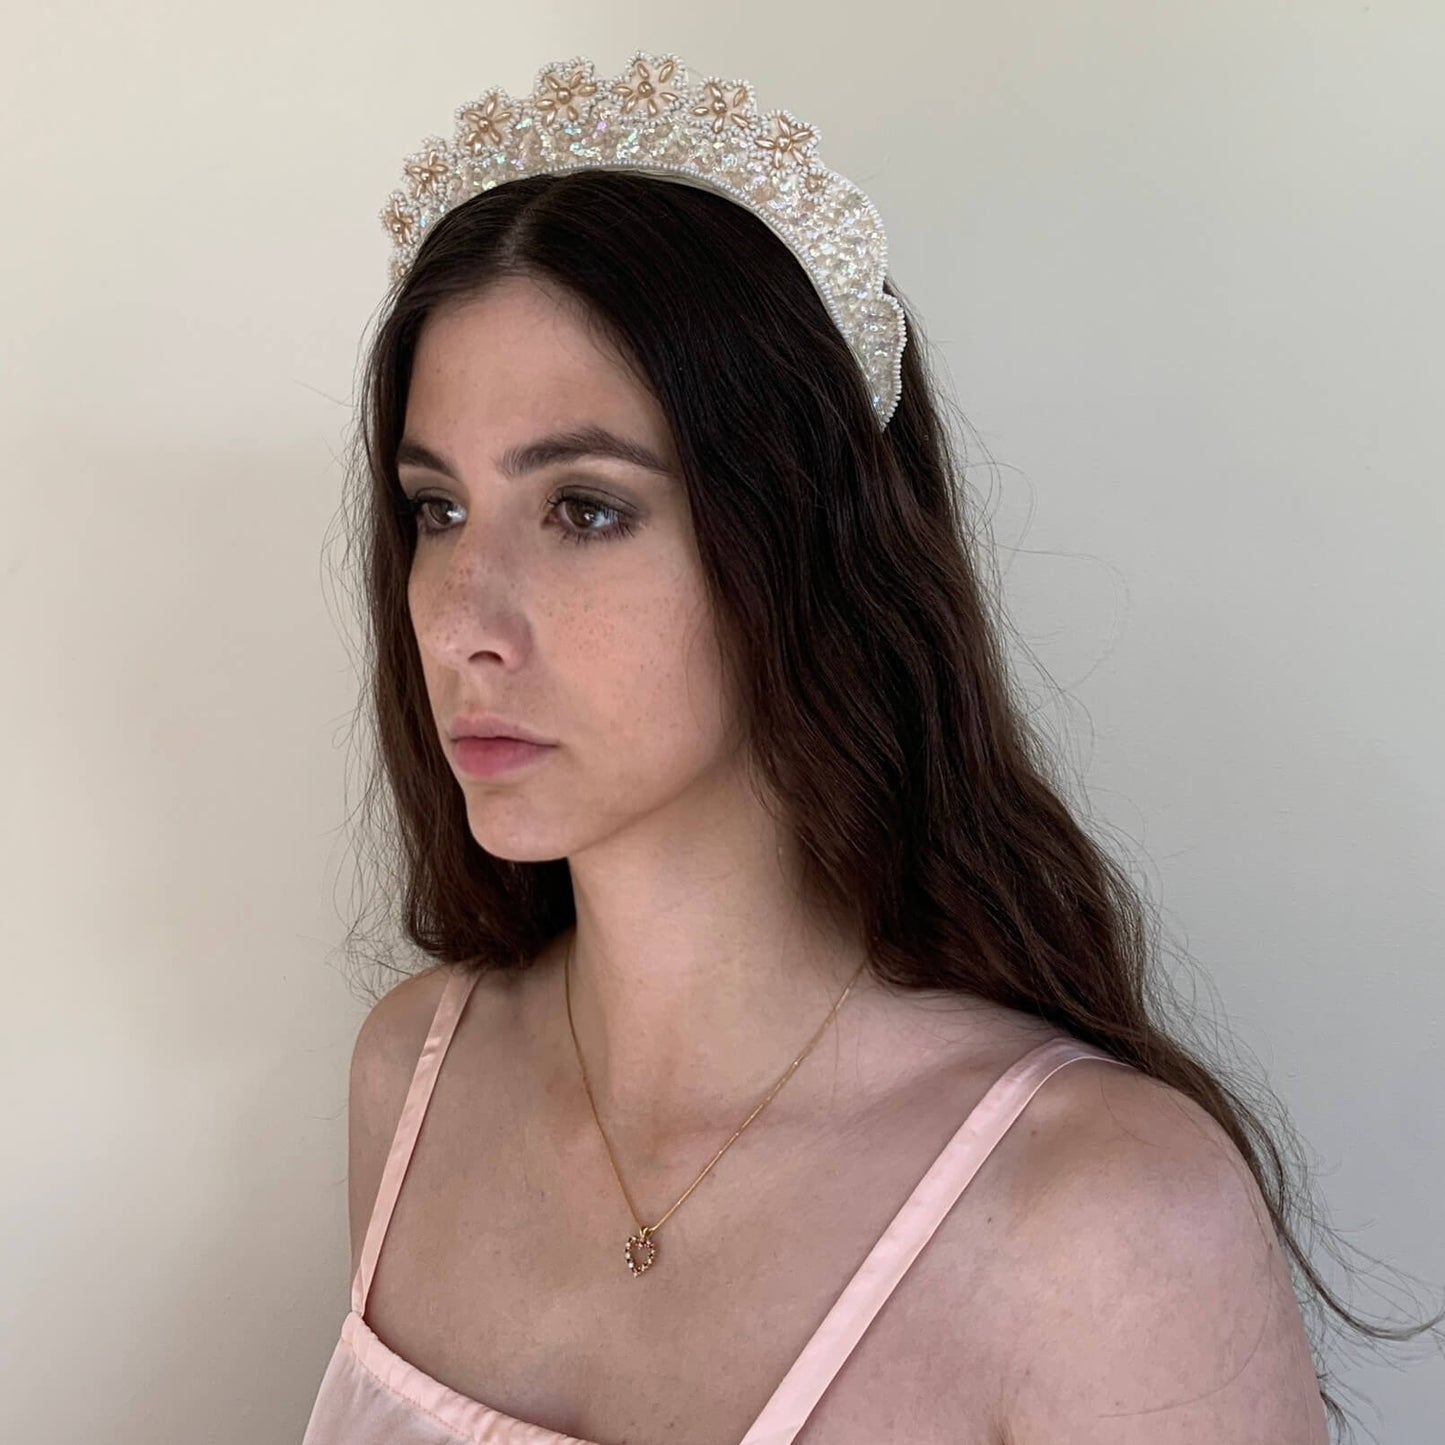 model turned to the side wearing the beaded crown